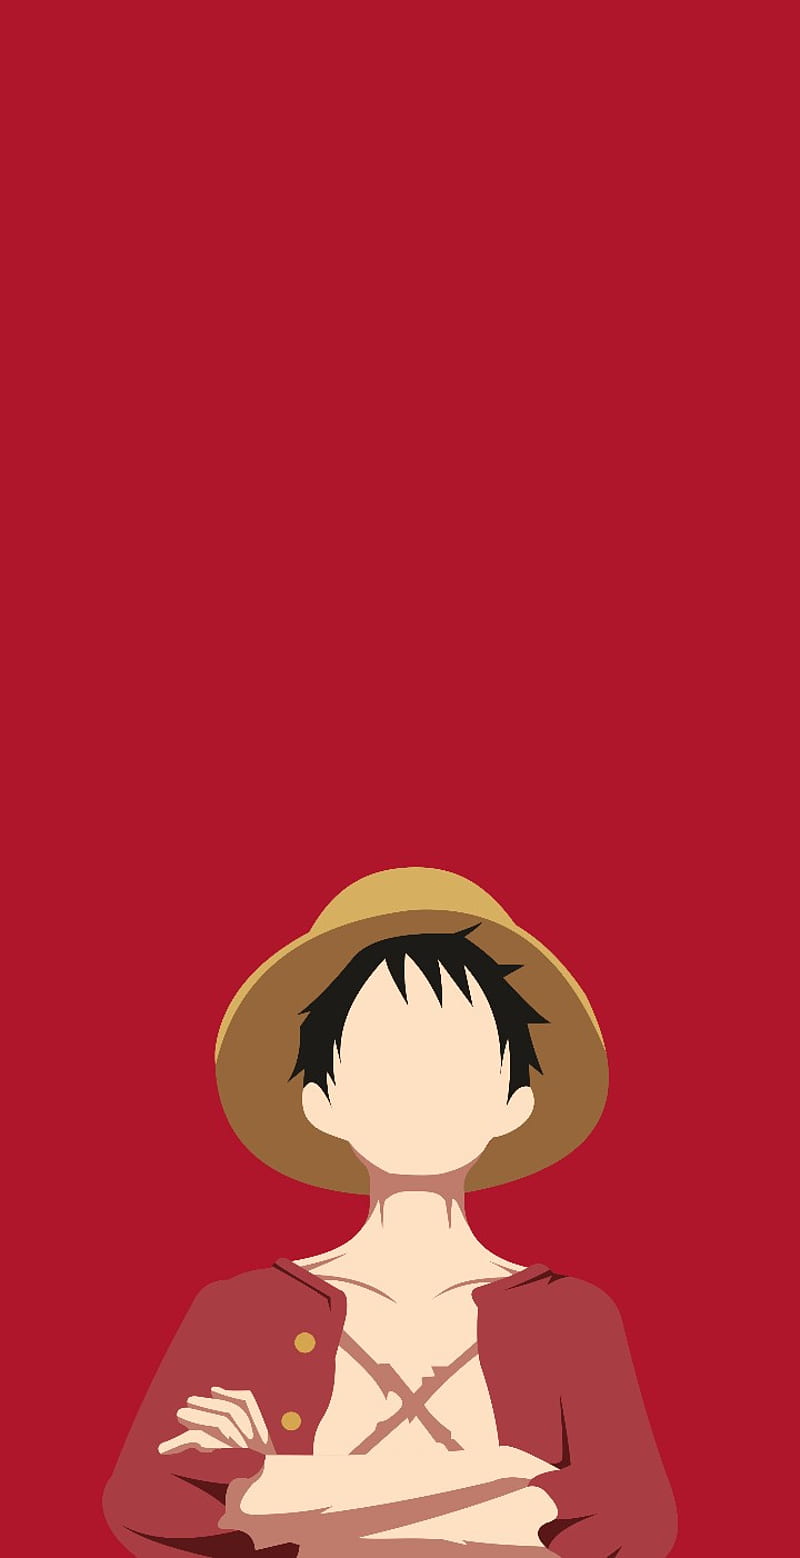 900+] One Piece Wallpapers | Wallpapers.com